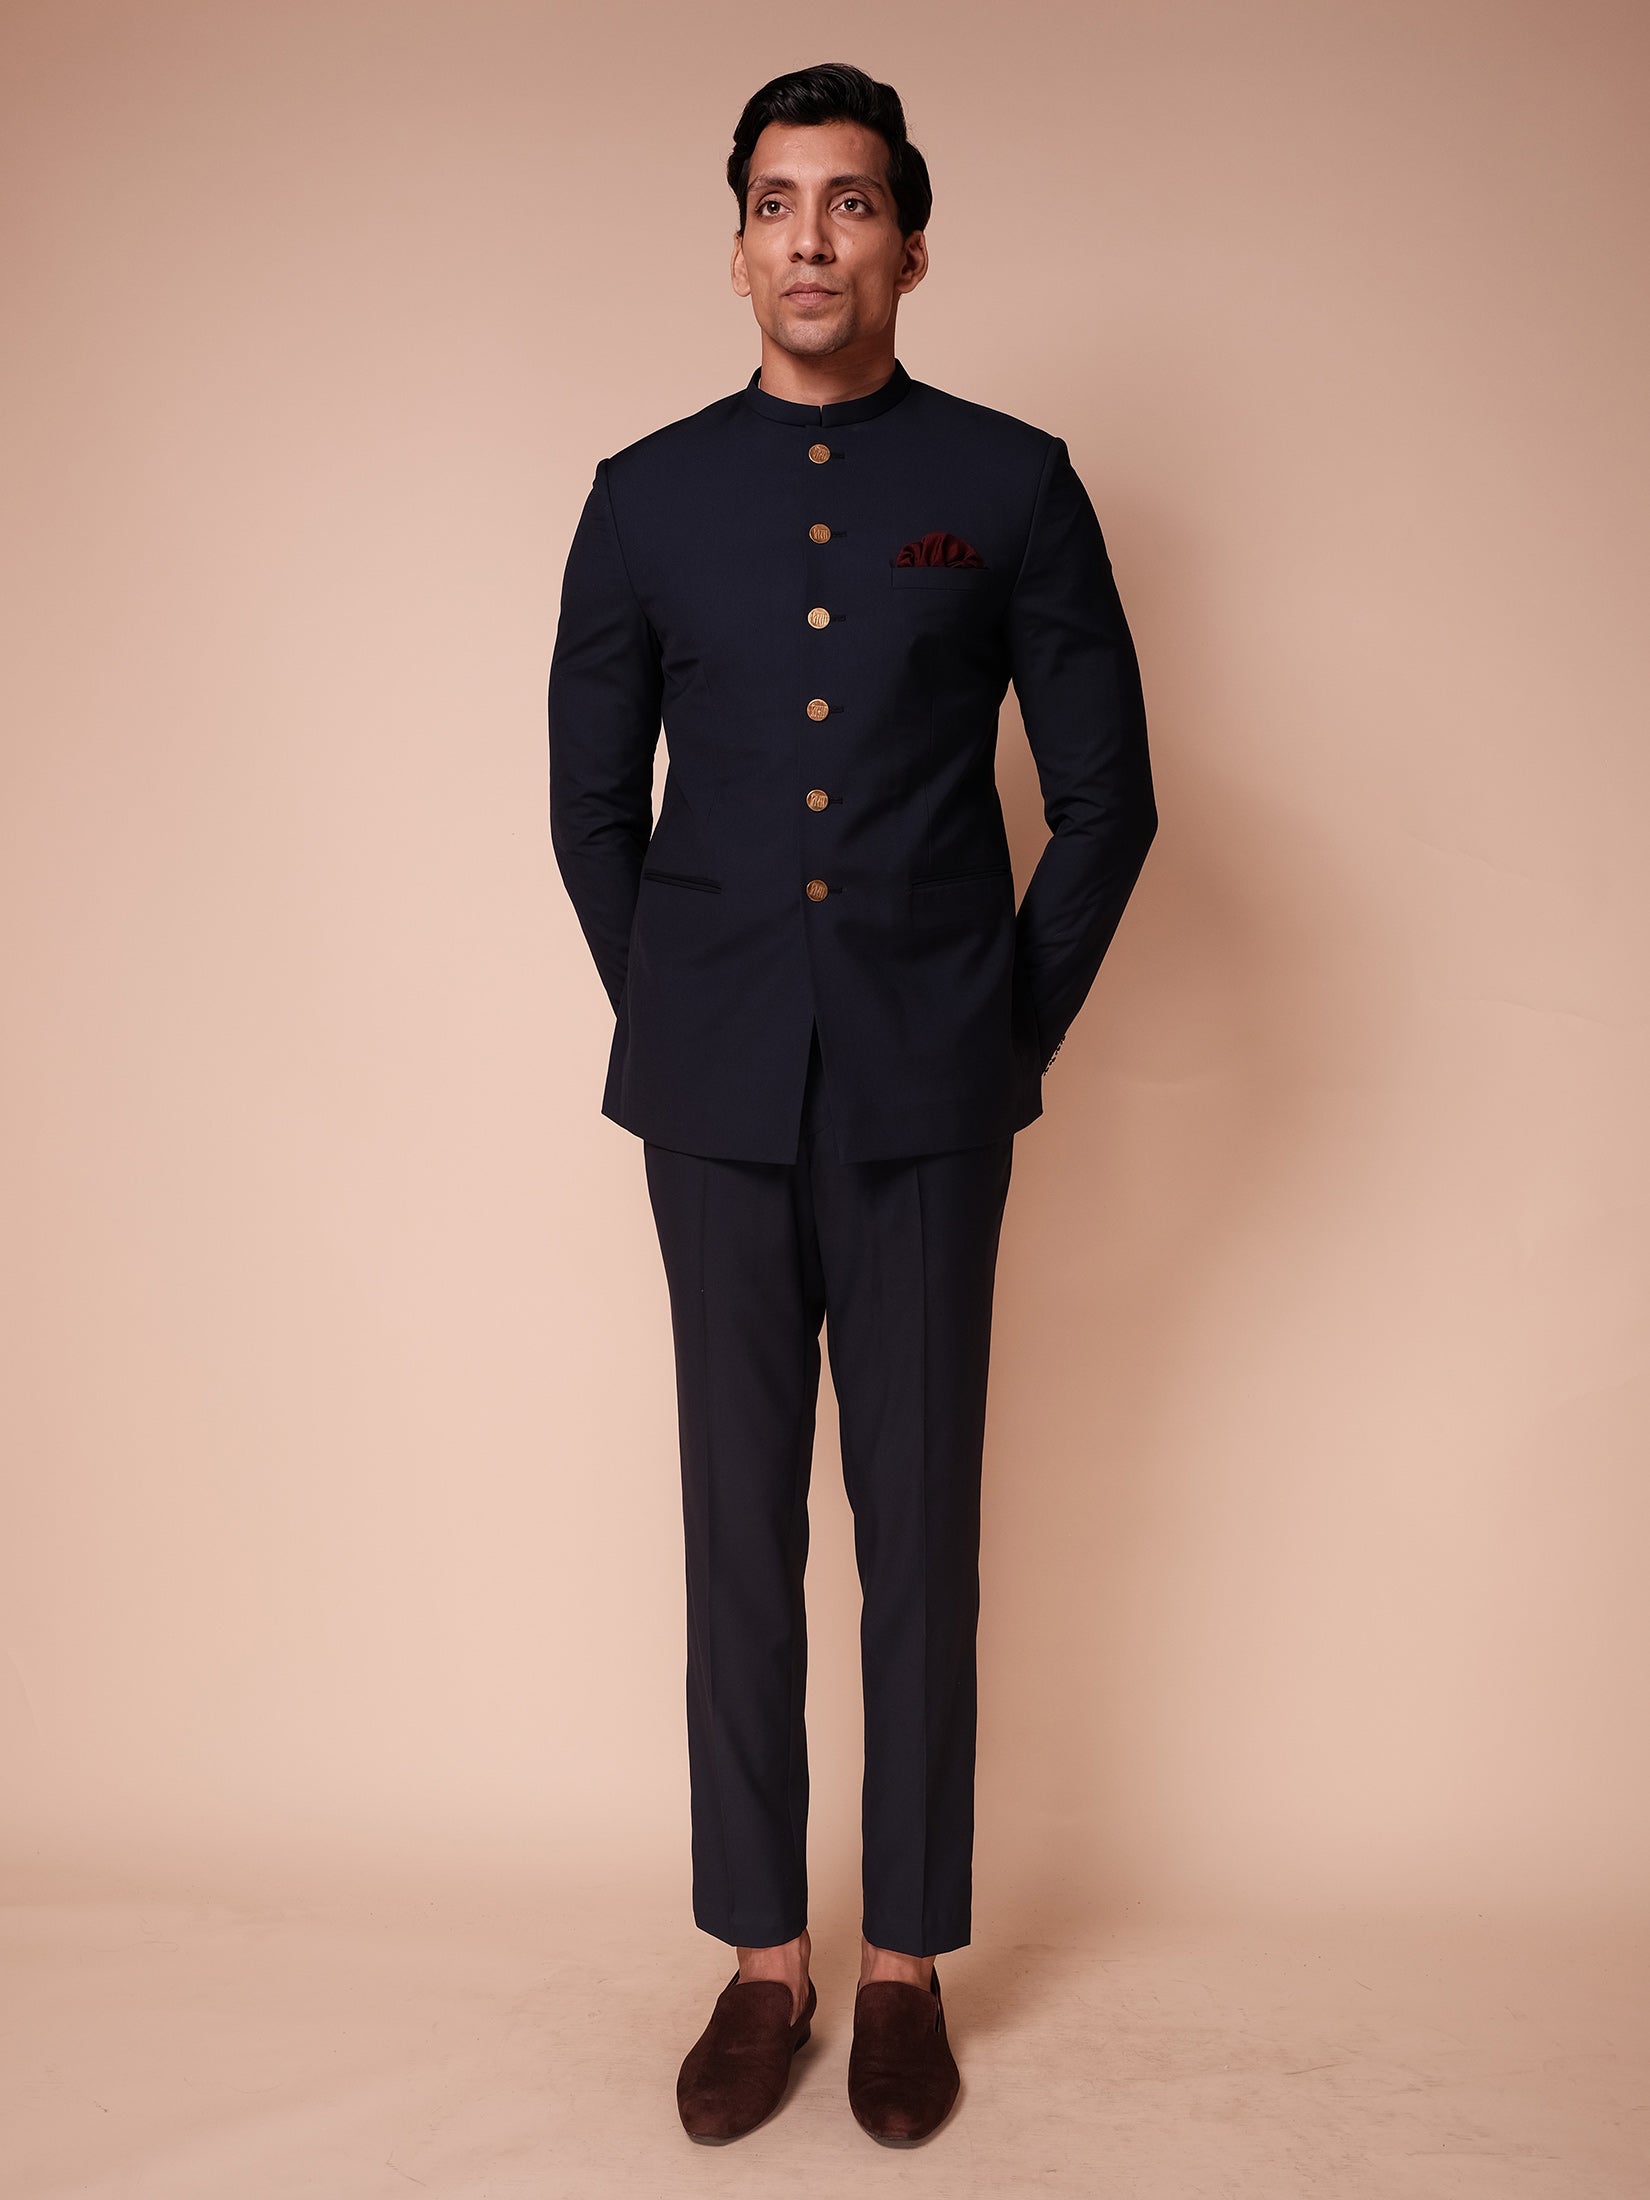 Midnight Blue Bandhgala With Signature Tisa Buttons Paired With Trousers